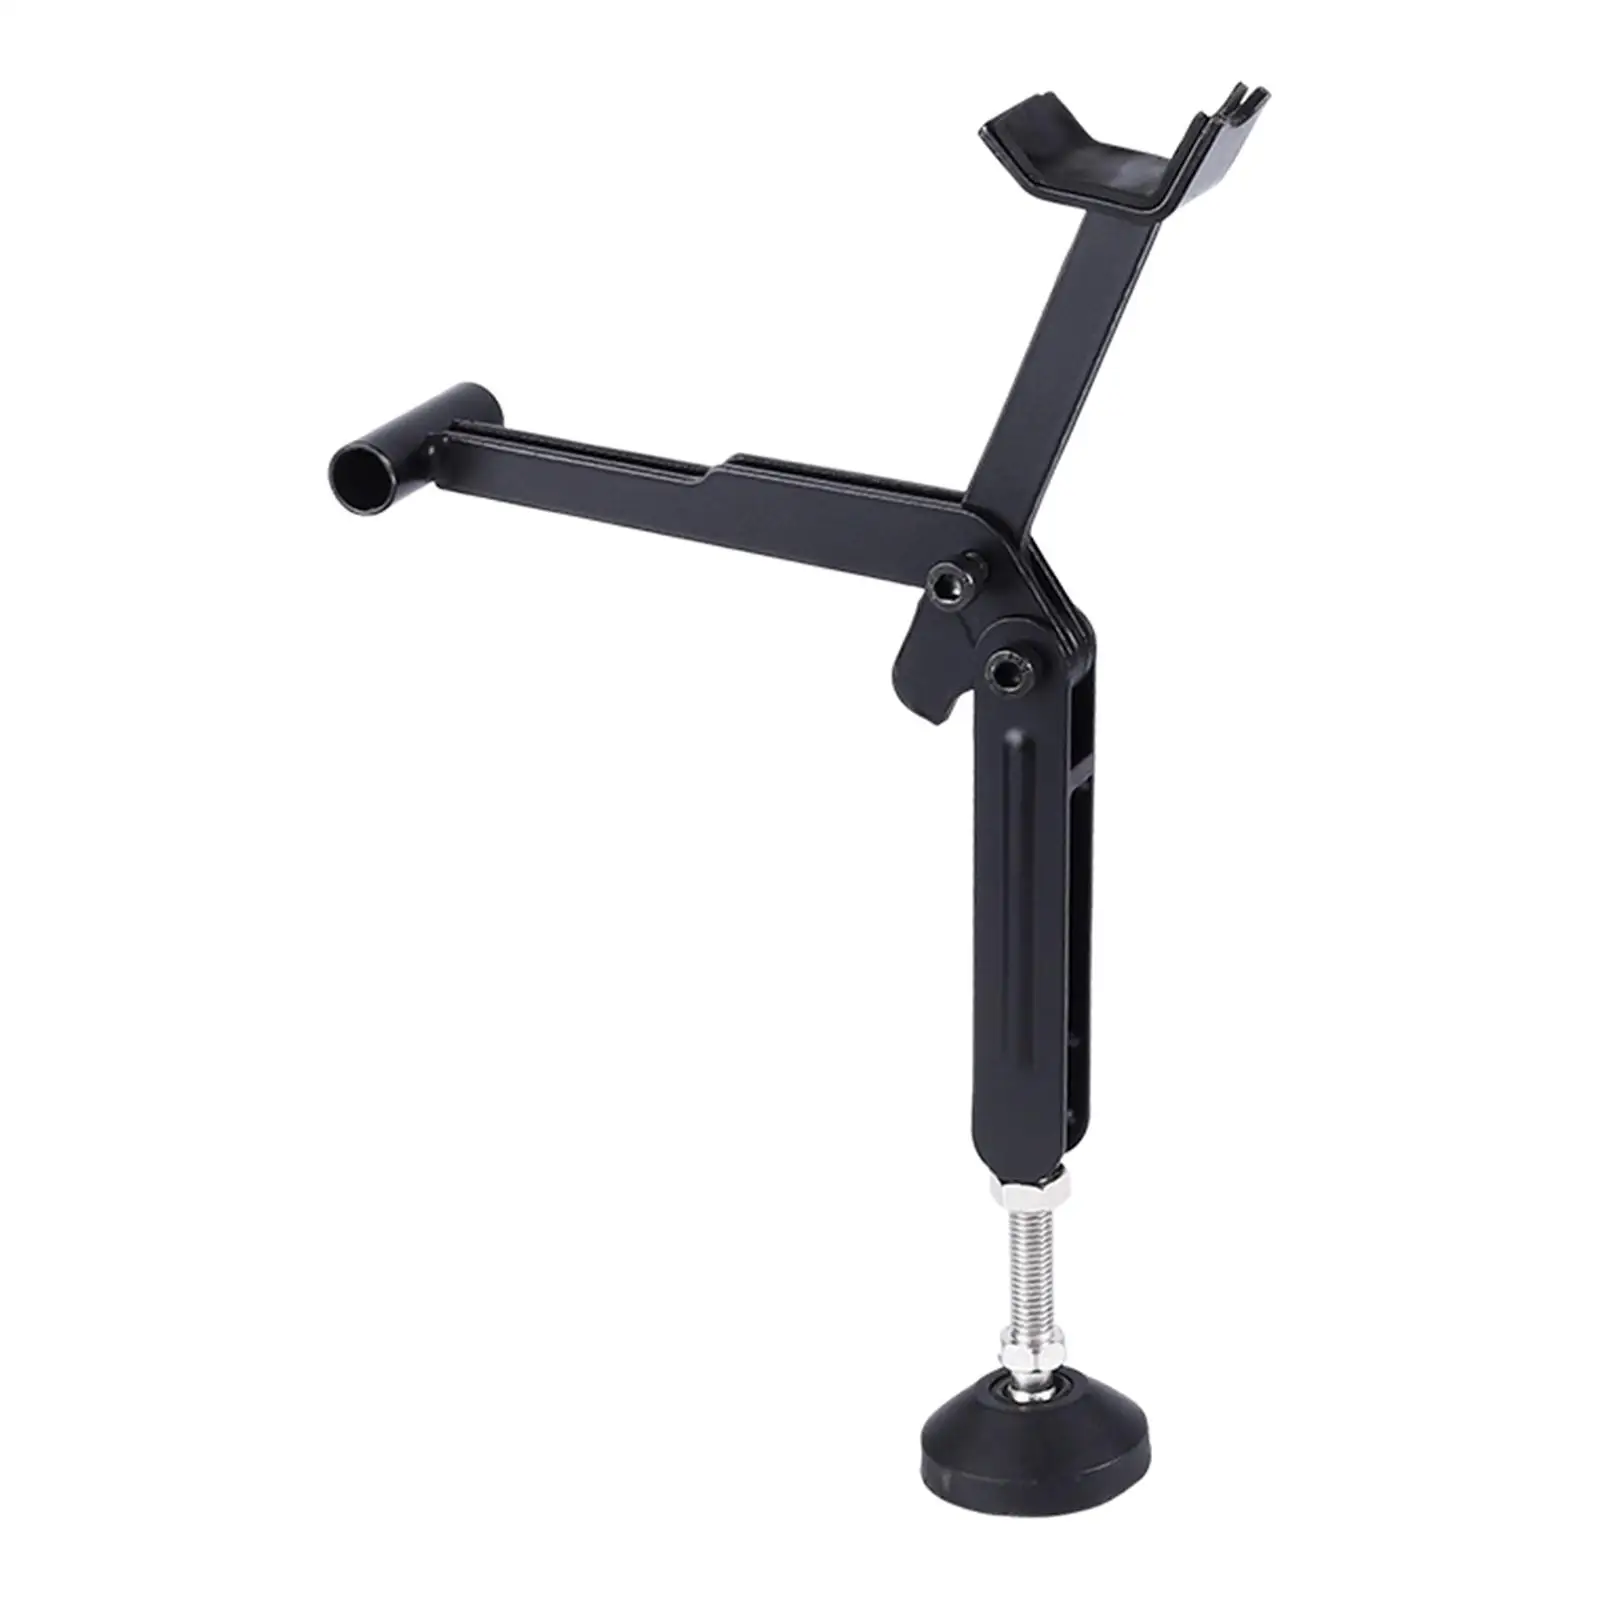 

Motorcycle Wheel Lift Stand Universal Tire Changing Stand Adjustable Foldable Sturdy Metal Stable Repair Maintain Support Frame